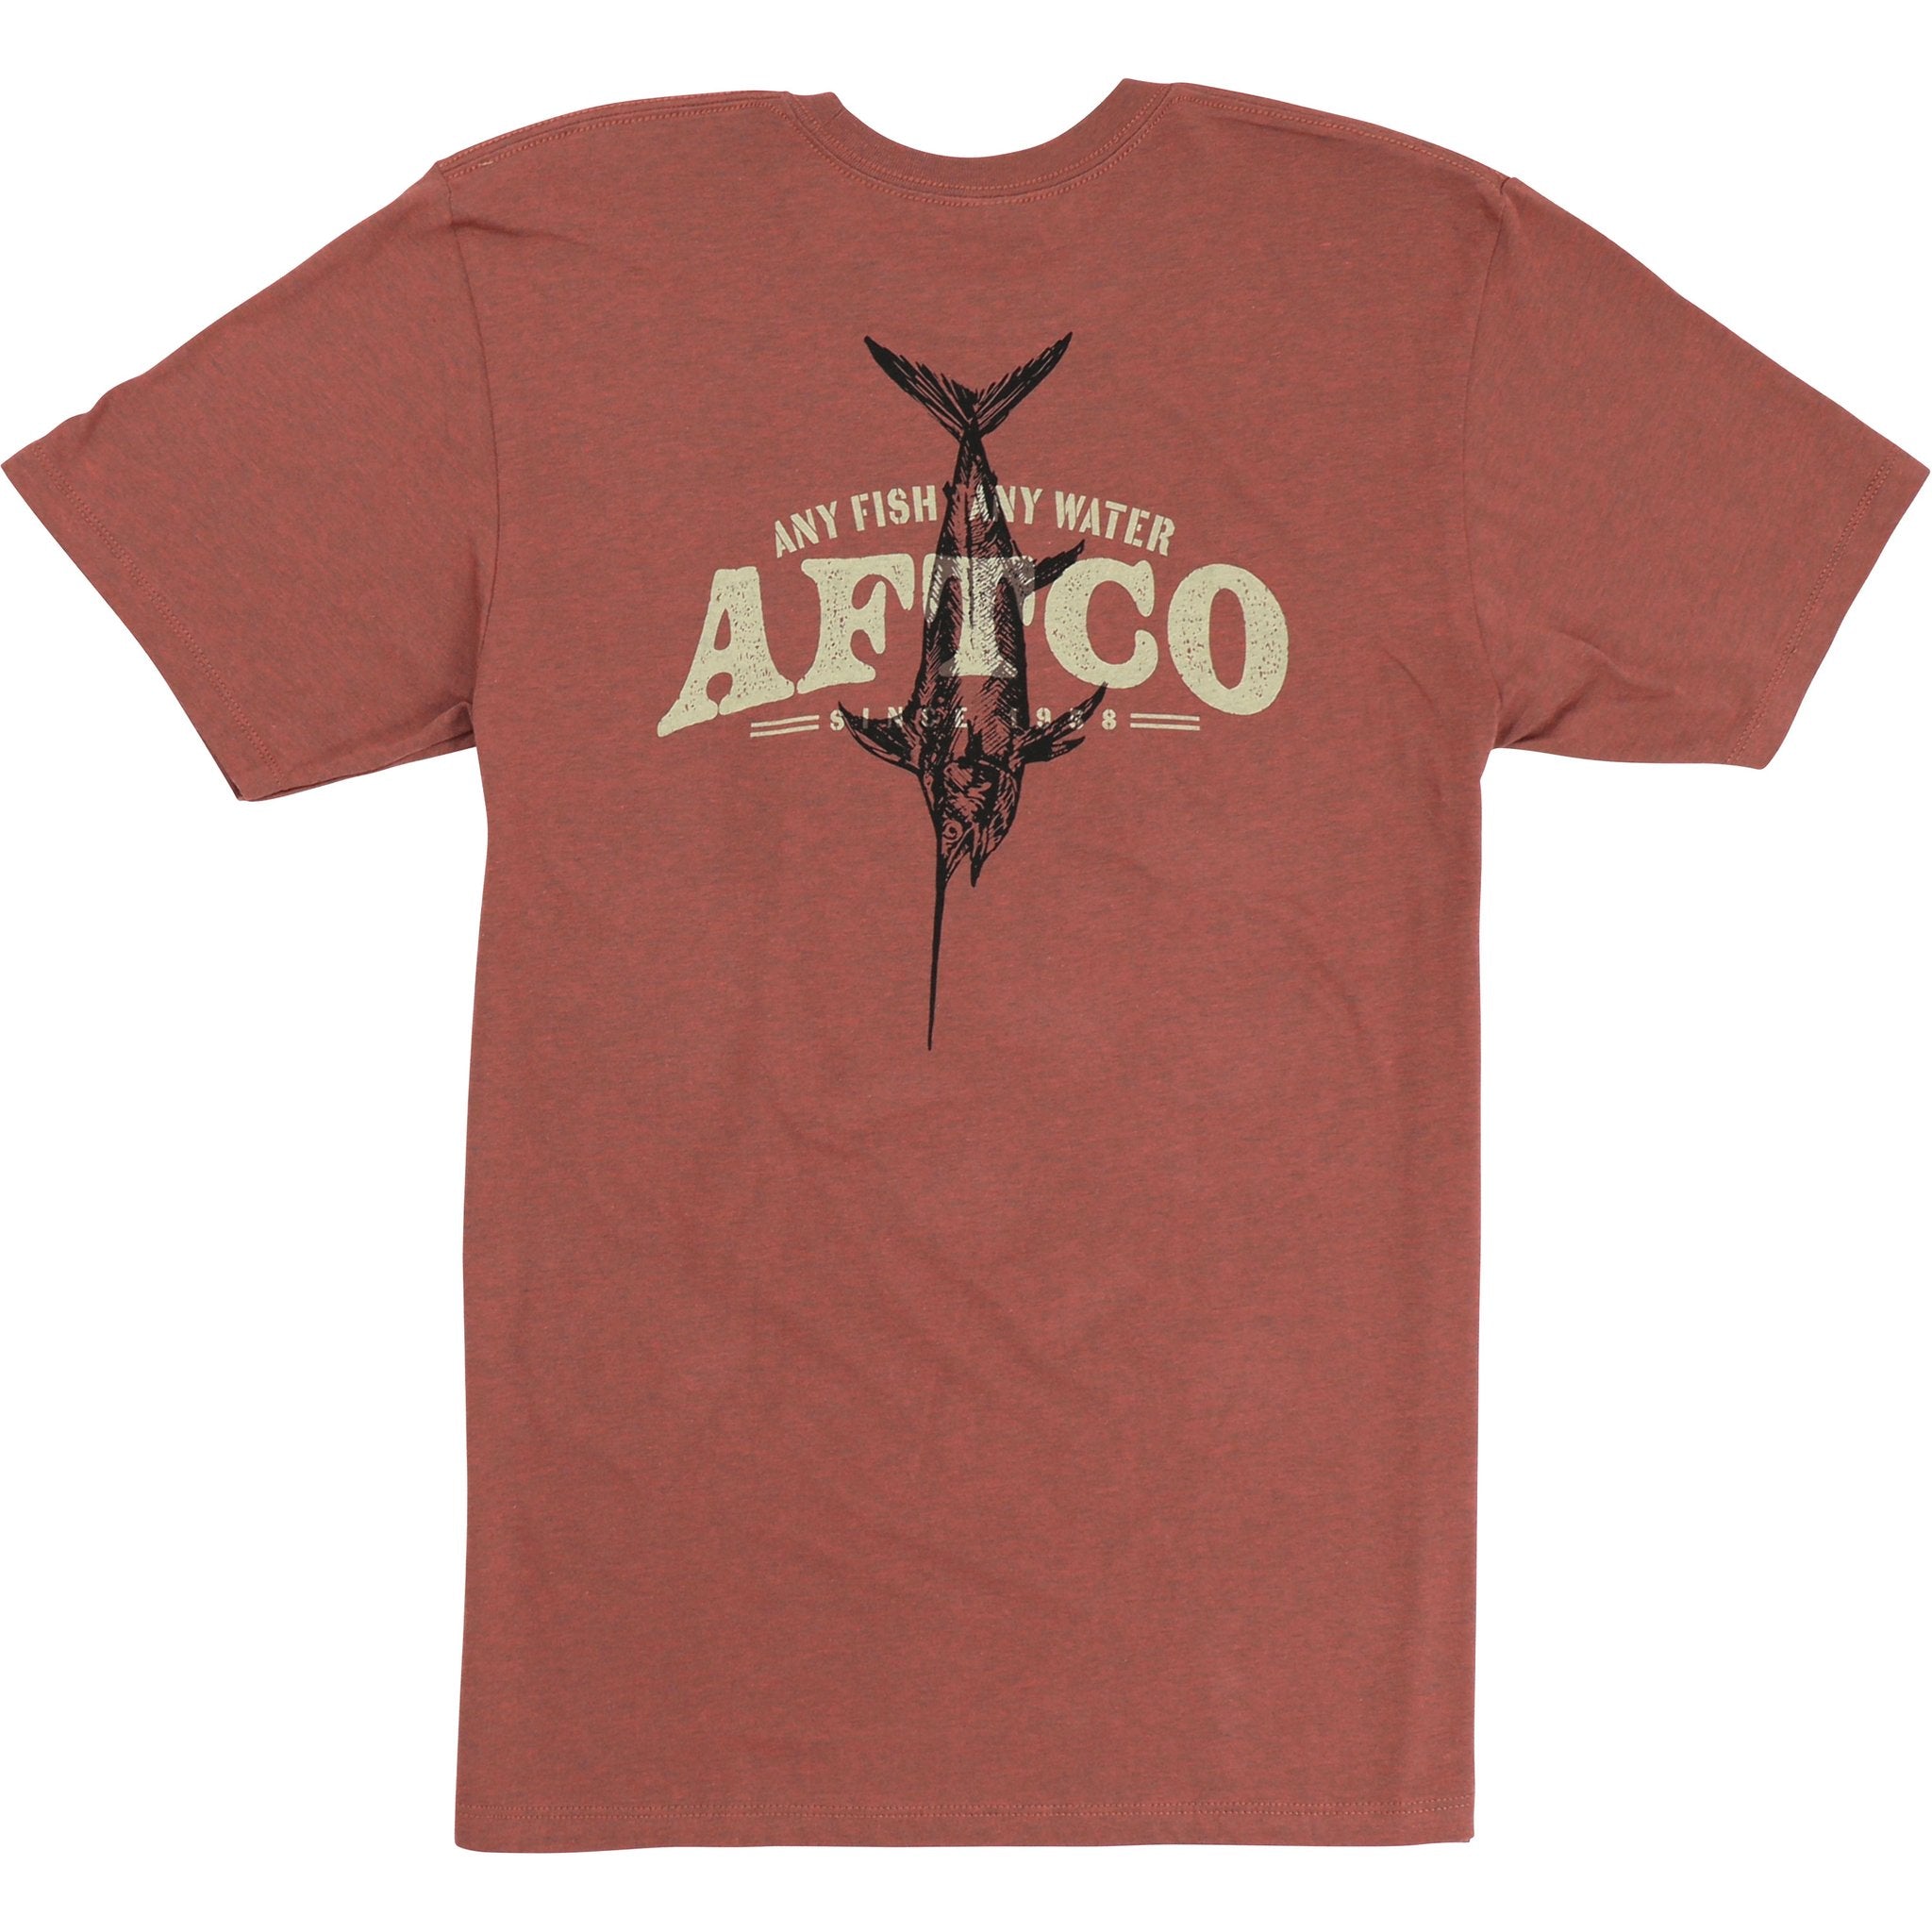 Aftco Weigh In SS Tee